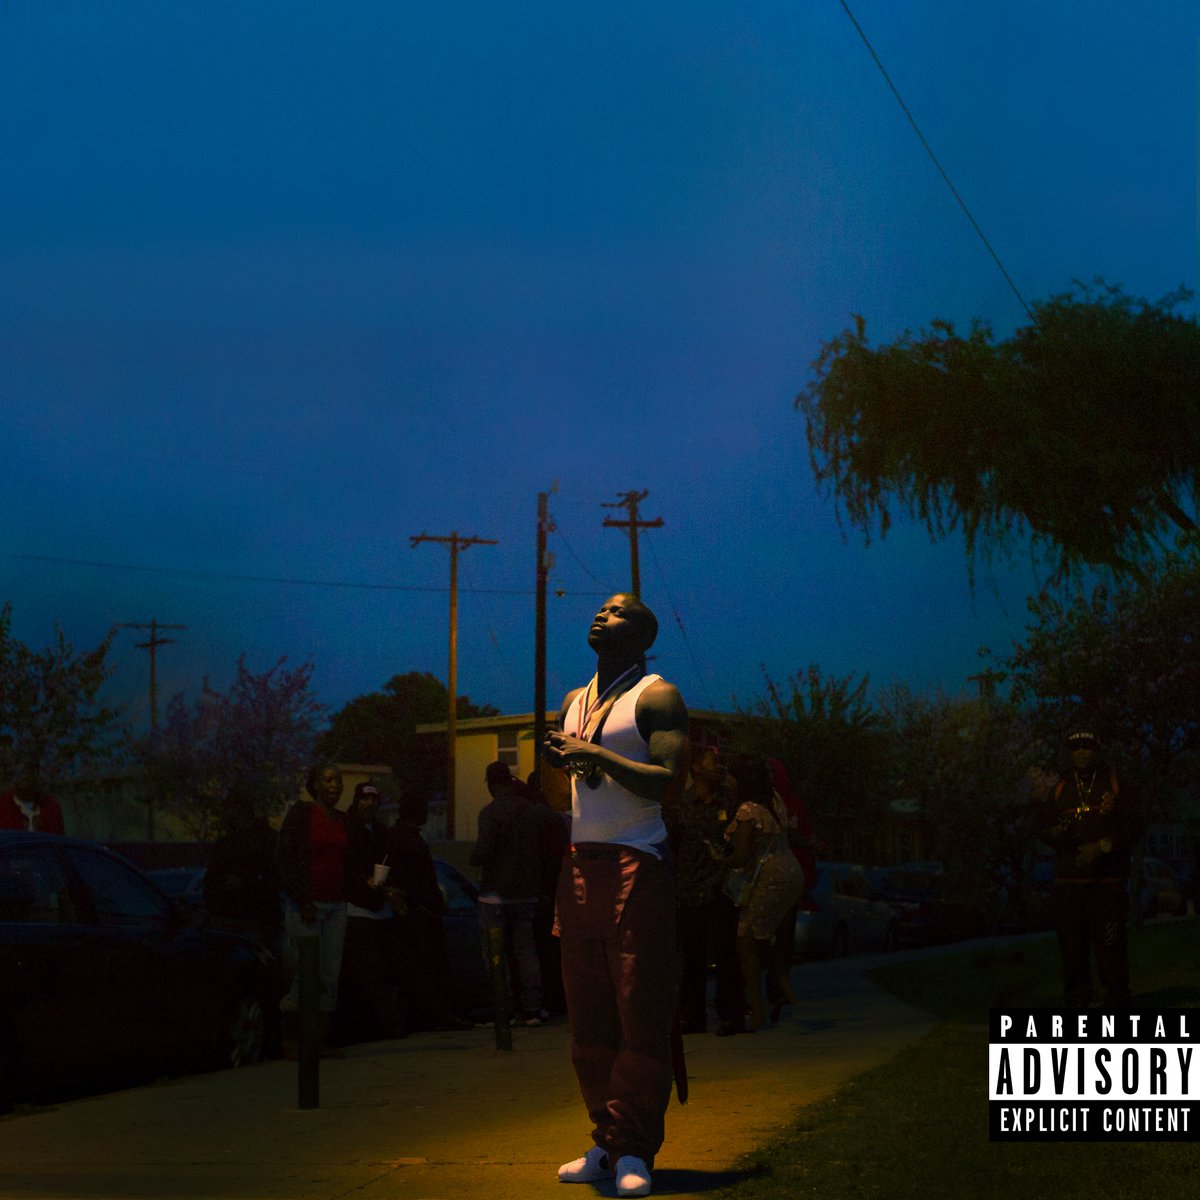 Jay Rock Announces New Album <i></noscript>Redemption</i>” title=”jay-rock-redemption” data-original-id=”290825″ data-adjusted-id=”290825″ class=”sm_size_full_width sm_alignment_center ” data-image-source=”free_stock” />
<p> </p>
</div>
</div>
</div>
</div>
</div>
</section>
<section data-particle_enable=